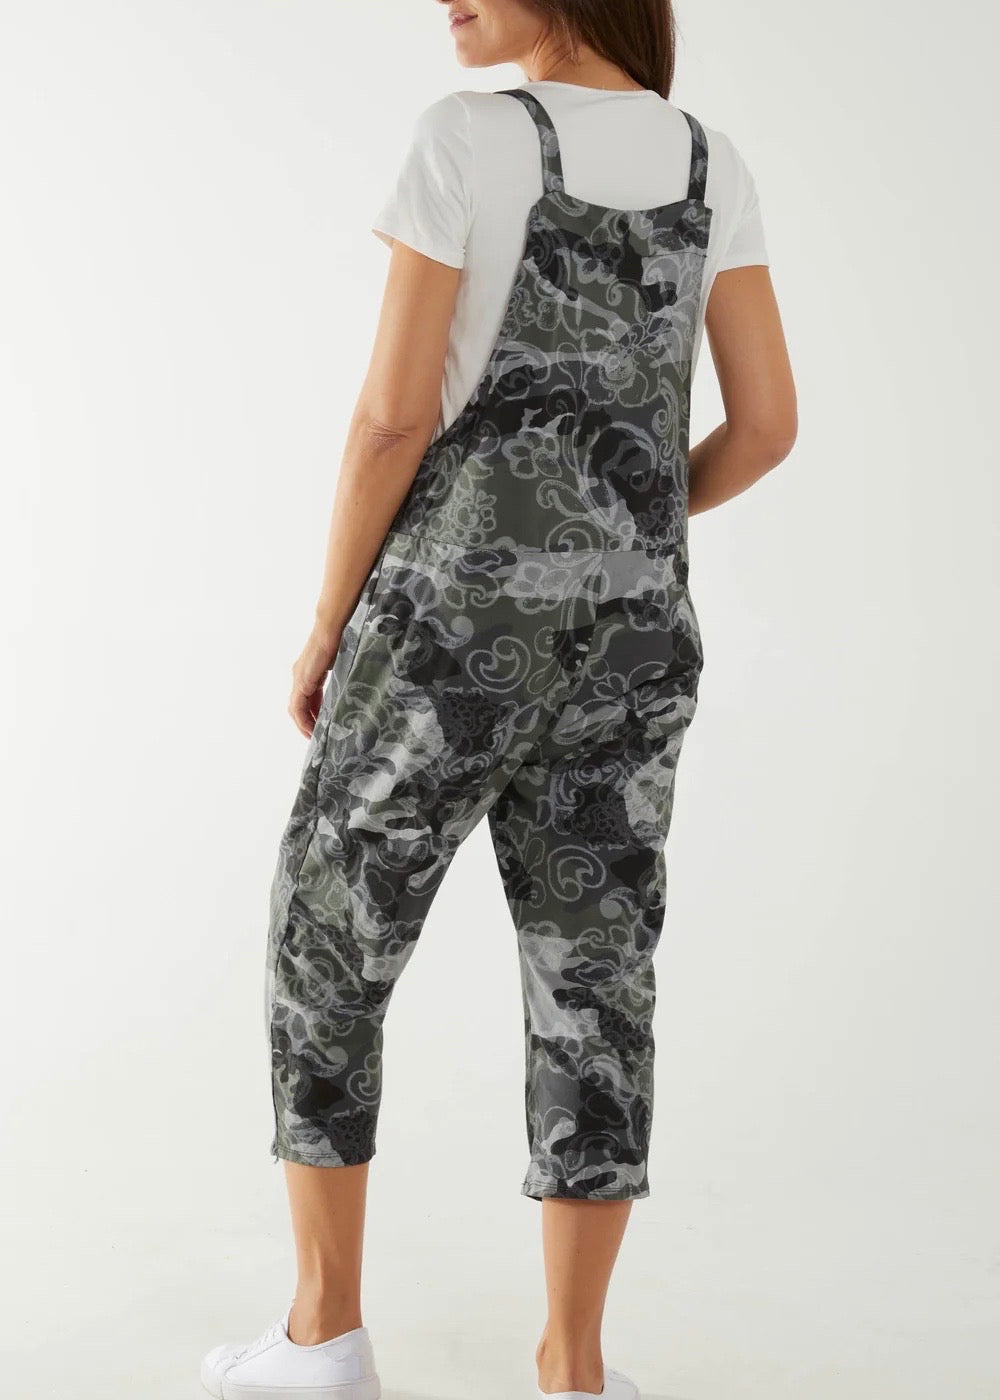 Sands - Porthleven Jersey Dungarees / Abstract Print